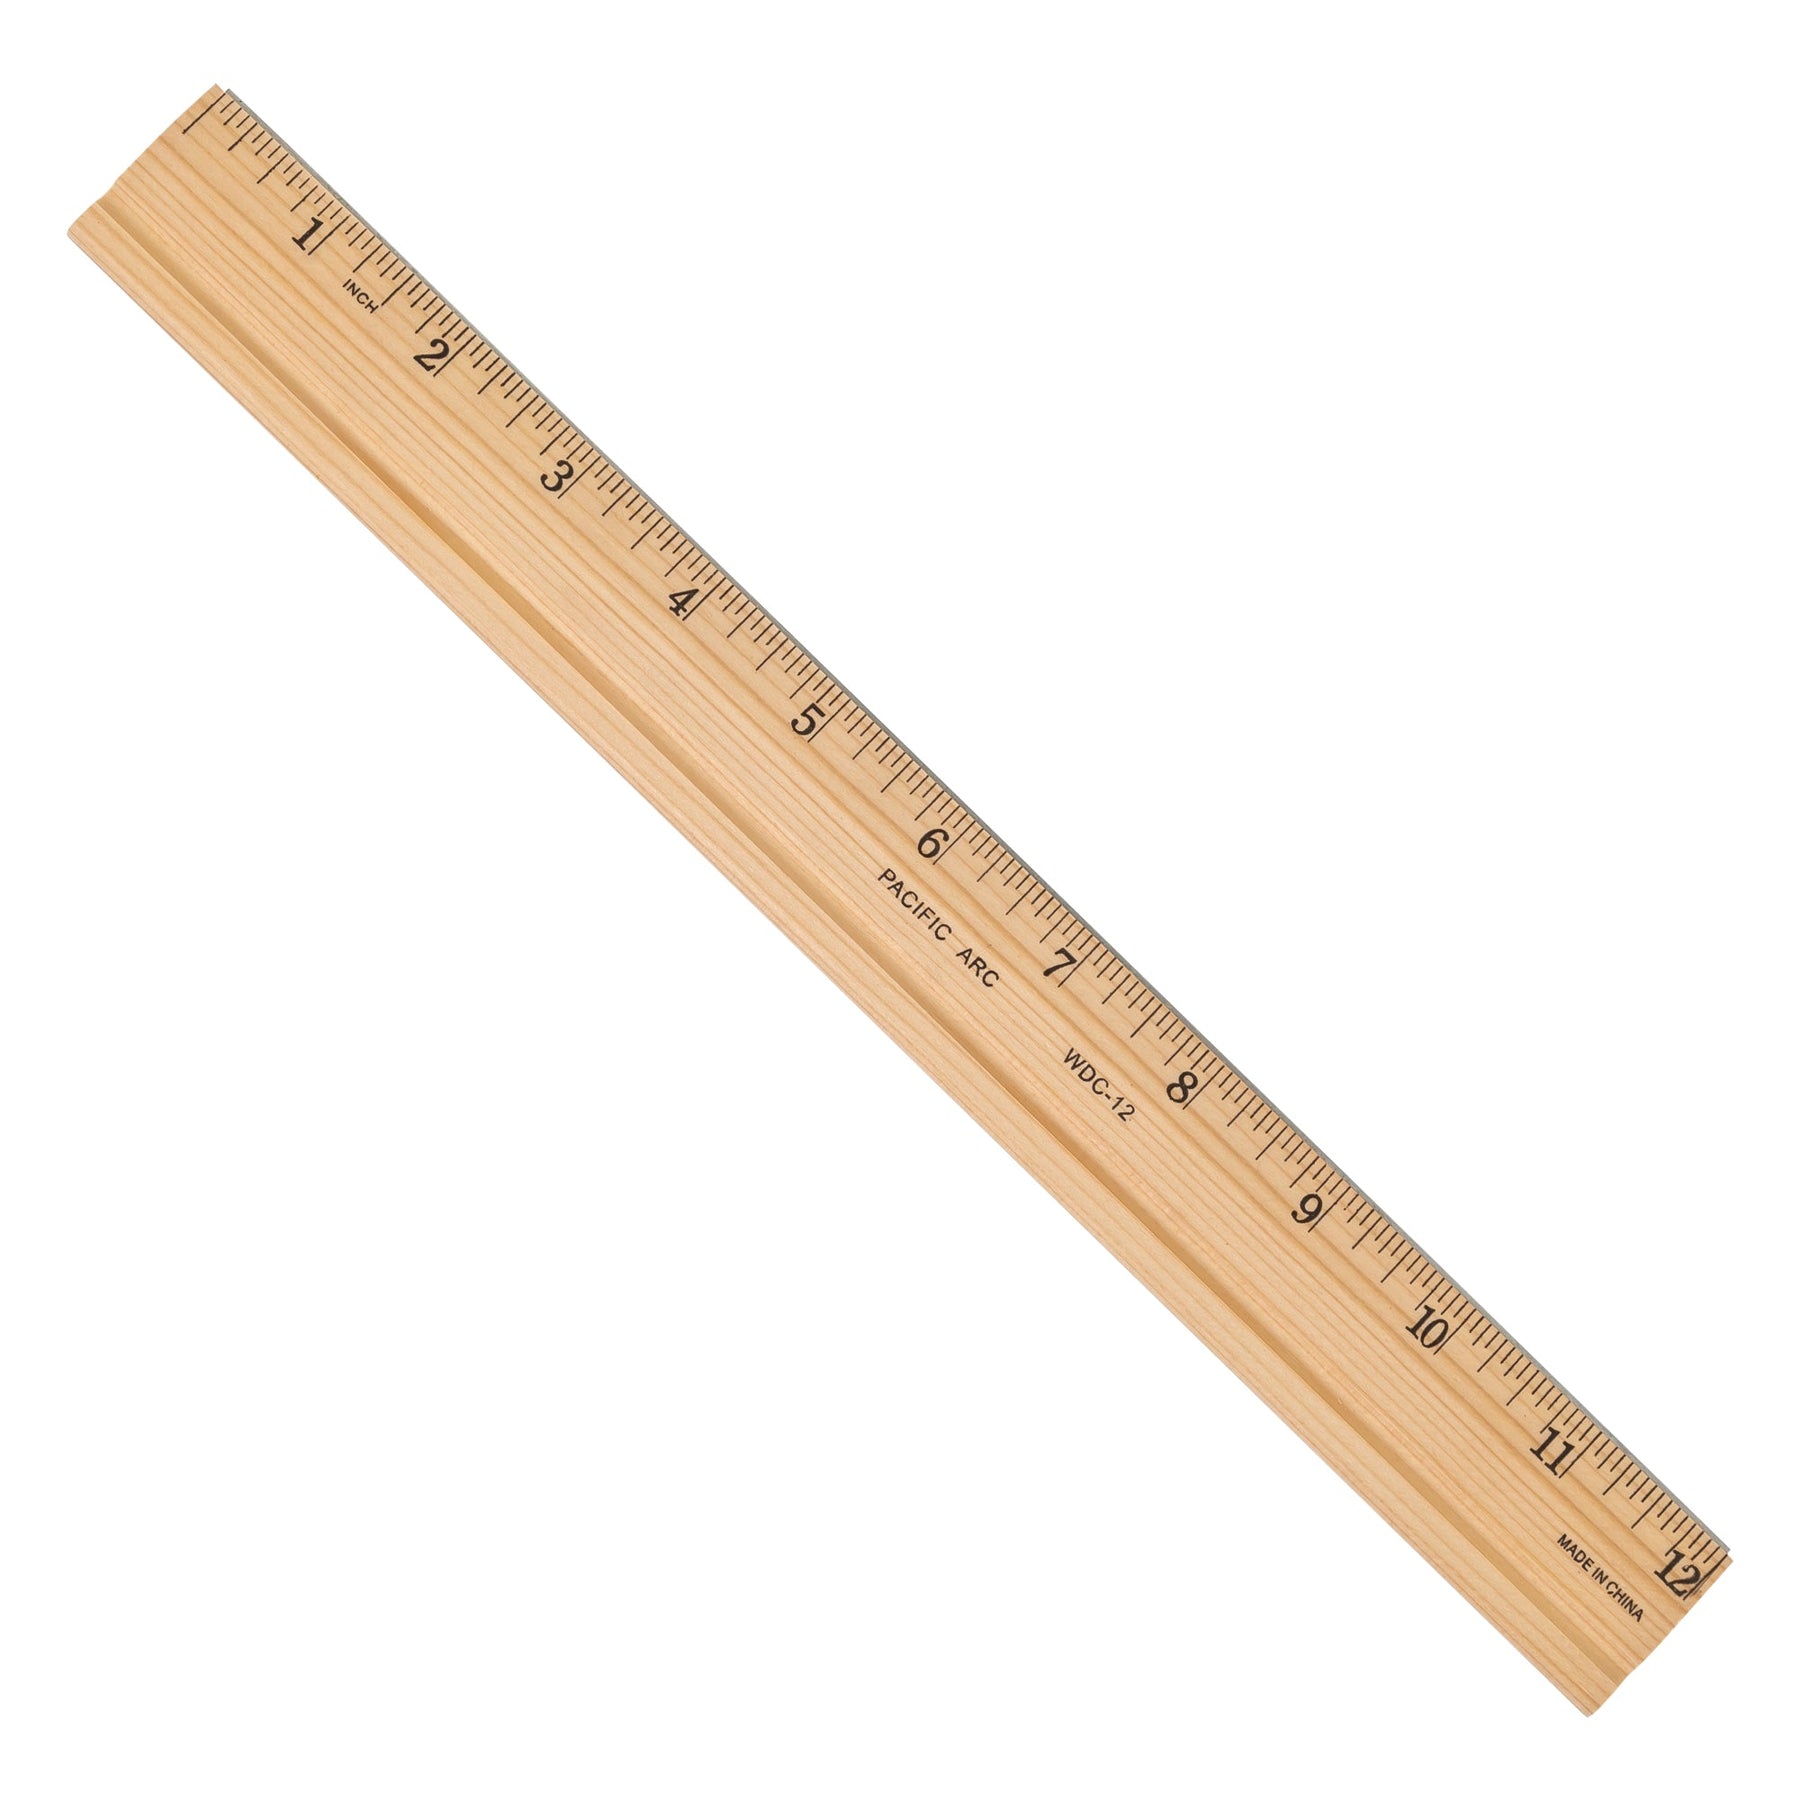 6 Wooden Ruler-made in USA 